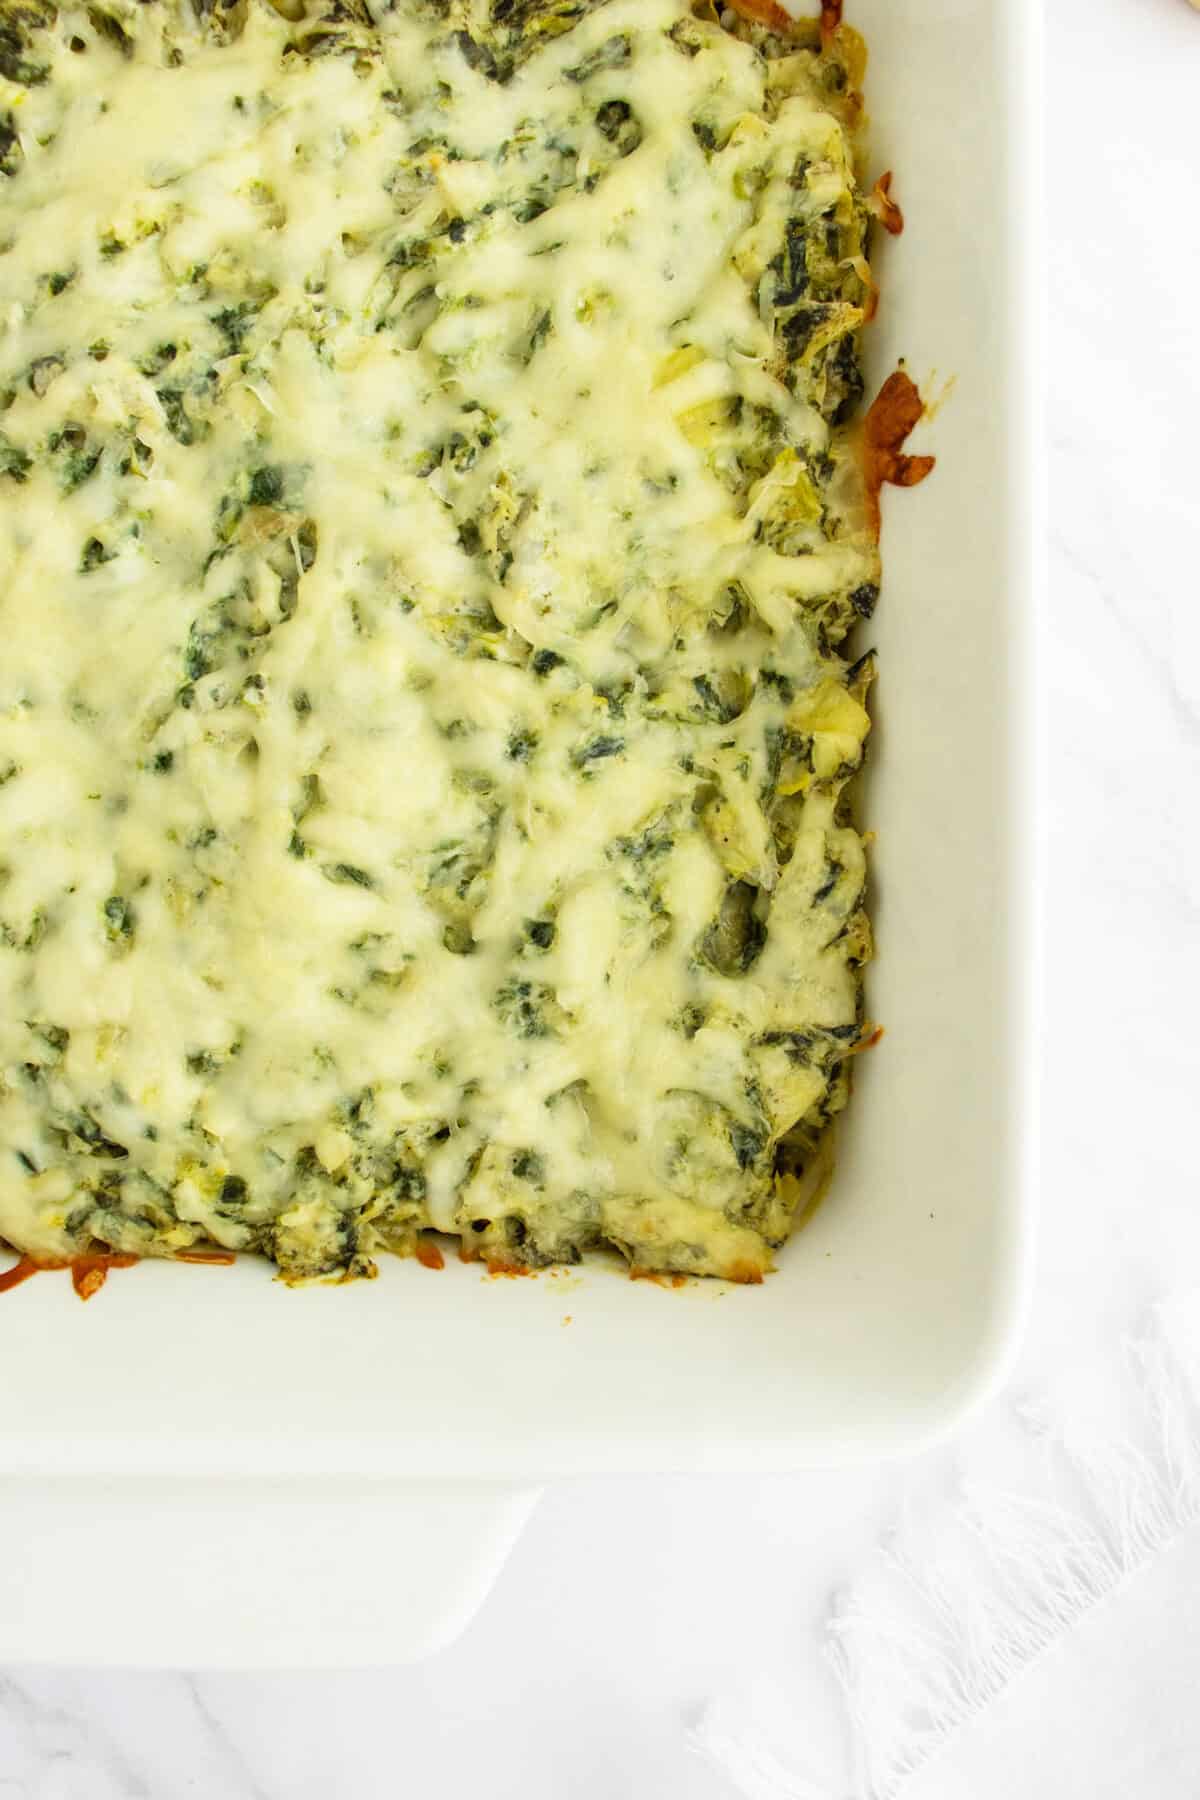 Hot and cheesy spinach and artichoke dip in baking pan